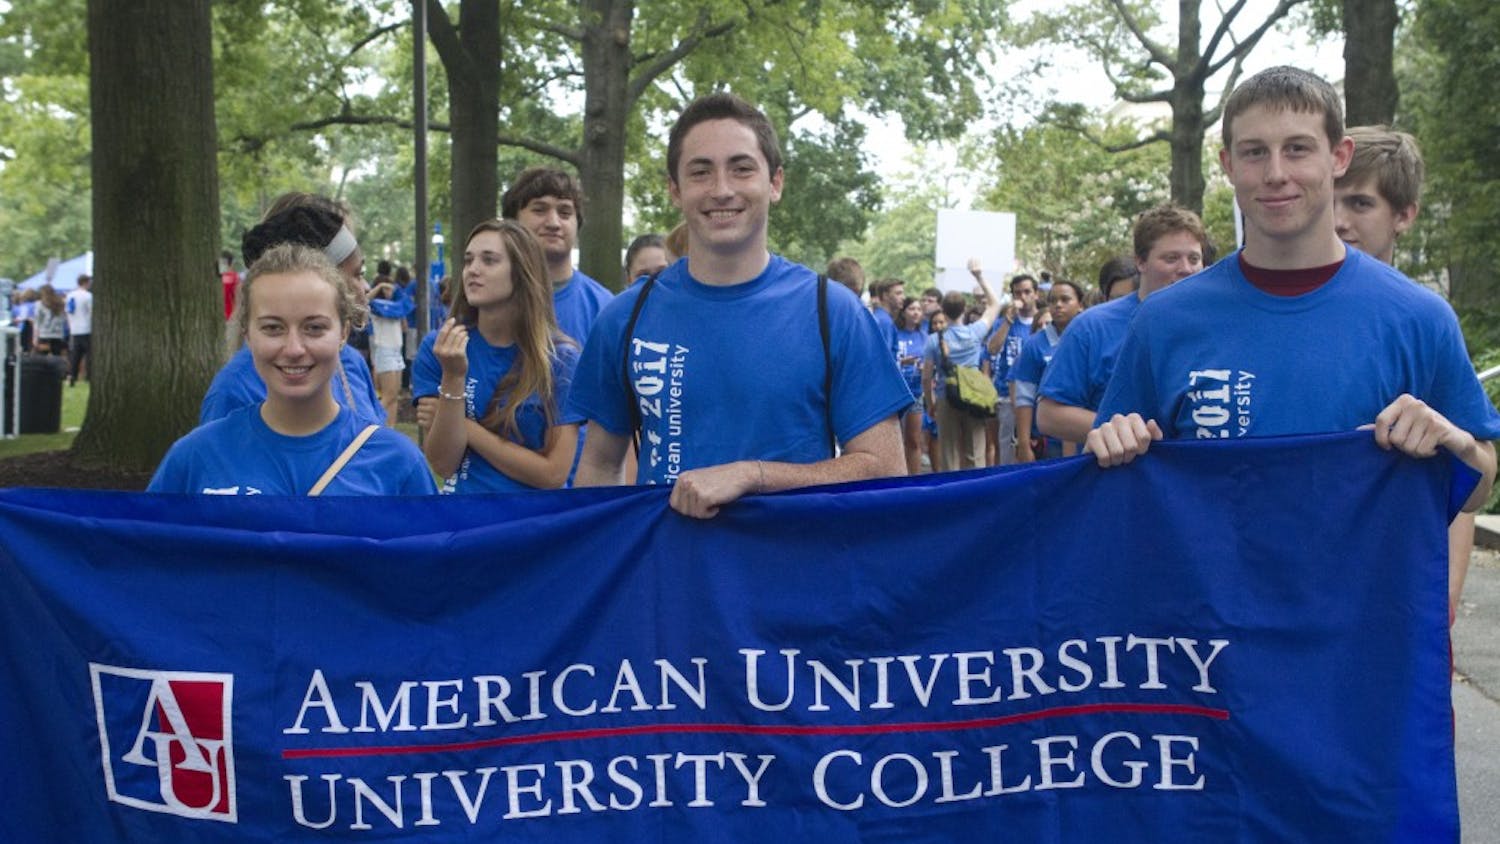 	University College students display a banner on the march to convocation.